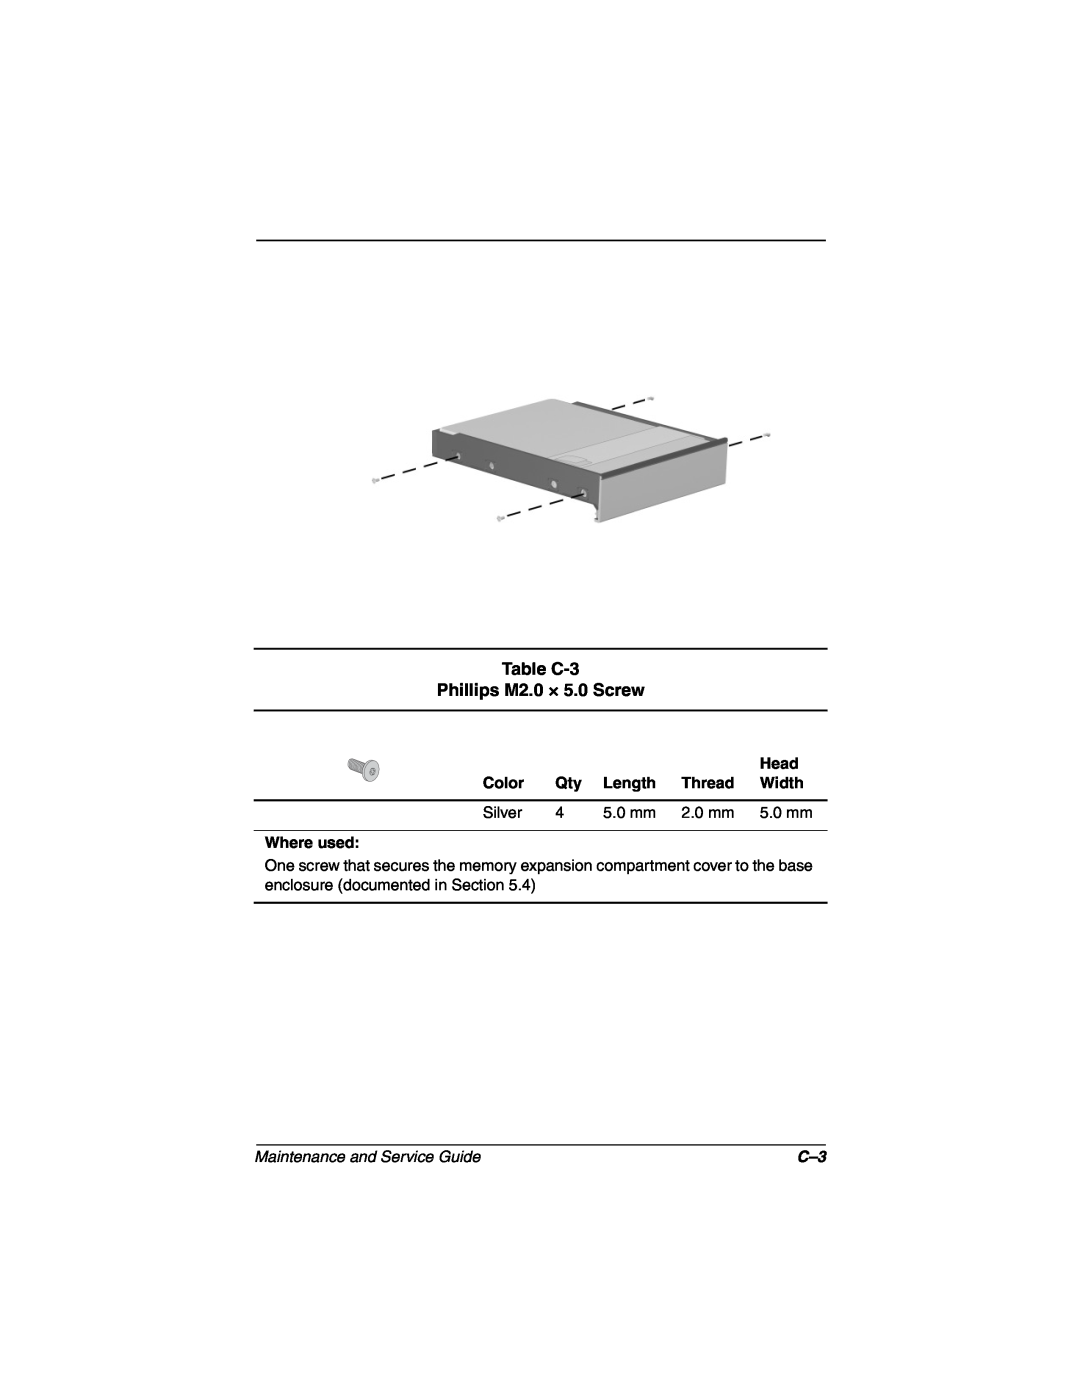 Compaq N160 manual Table C-3 Phillips M2.0 × 5.0 Screw, Maintenance and Service Guide 